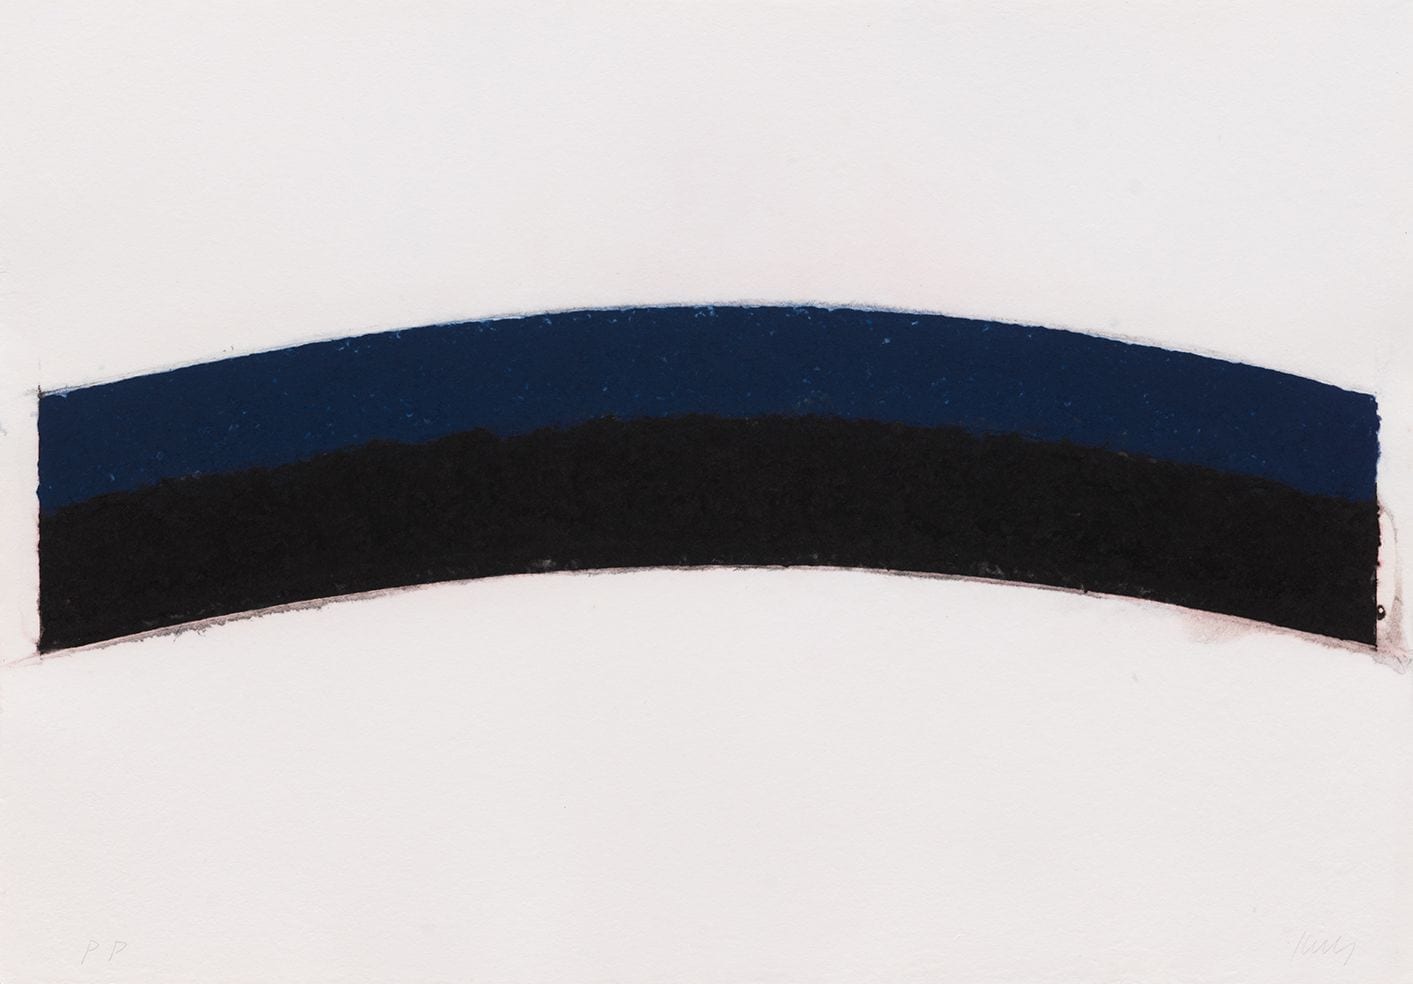 Colored Paper Image III, 1976, Colored and pressed paper pulp by Ellsworth Kelly